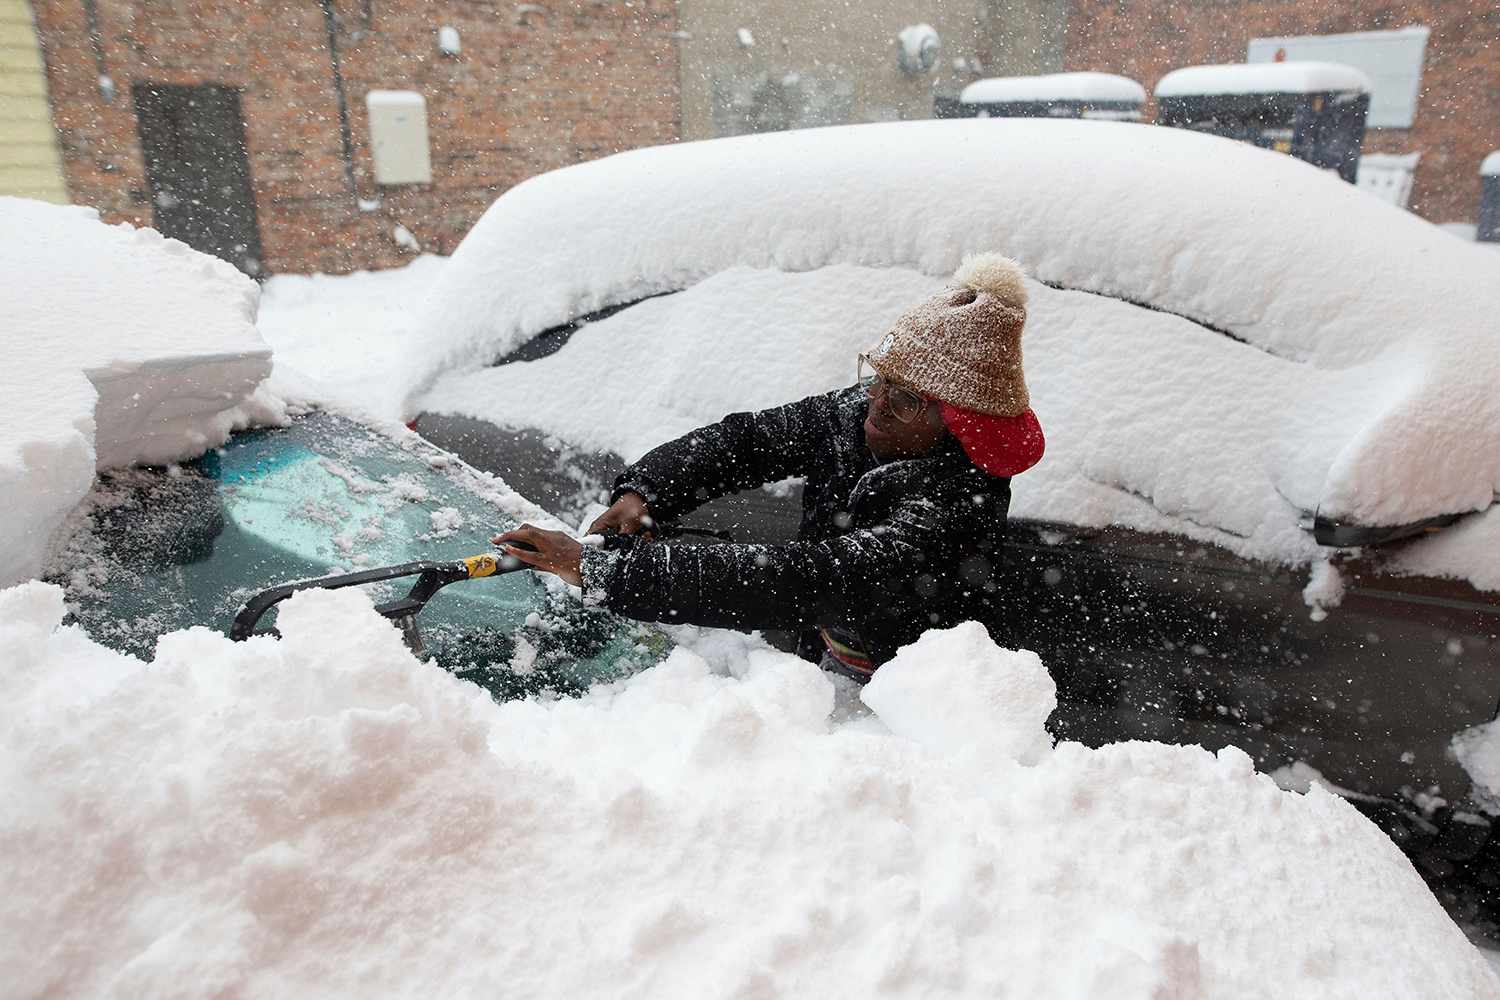 Zaria Black, 24, from Buffalo, clears off her car as snow falls, in Buffalo, N.Y. A dangerous lake-effect snowstorm paralyzed parts of western and northern New York, with nearly 2 feet of snow already on the ground in some places and possibly much more on the way